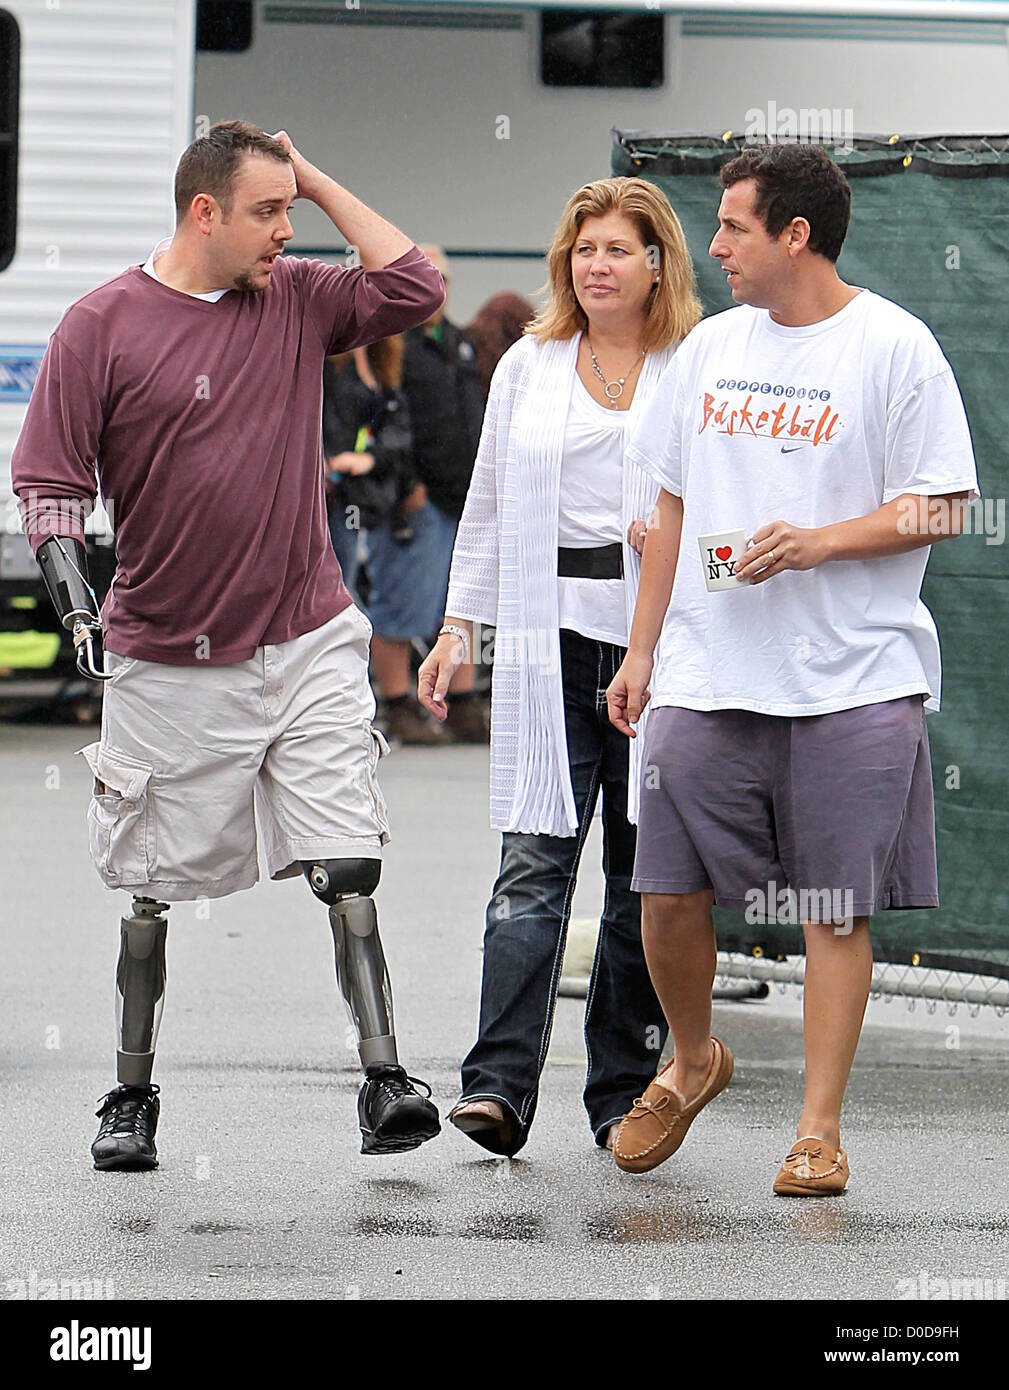 Adam Sandler on the movie set 'Jack and Jill' with an Iraq war veteran  competition winner to see the filming on location Stock Photo - Alamy